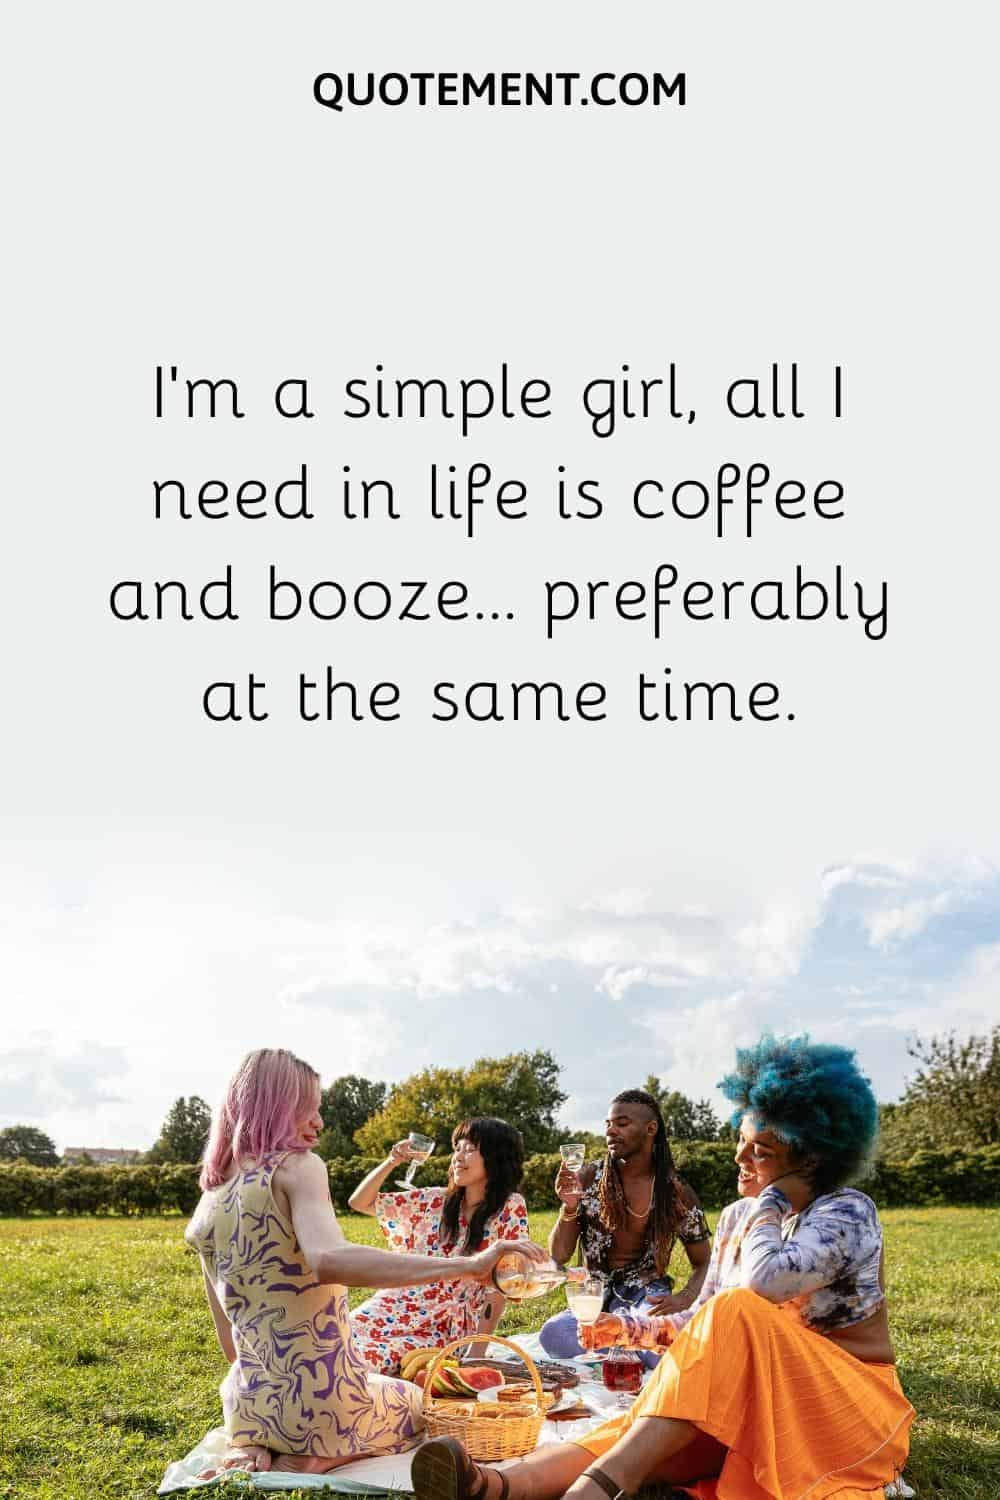 I'm a simple girl, all I need in life is coffee and booze... preferably at the same time.